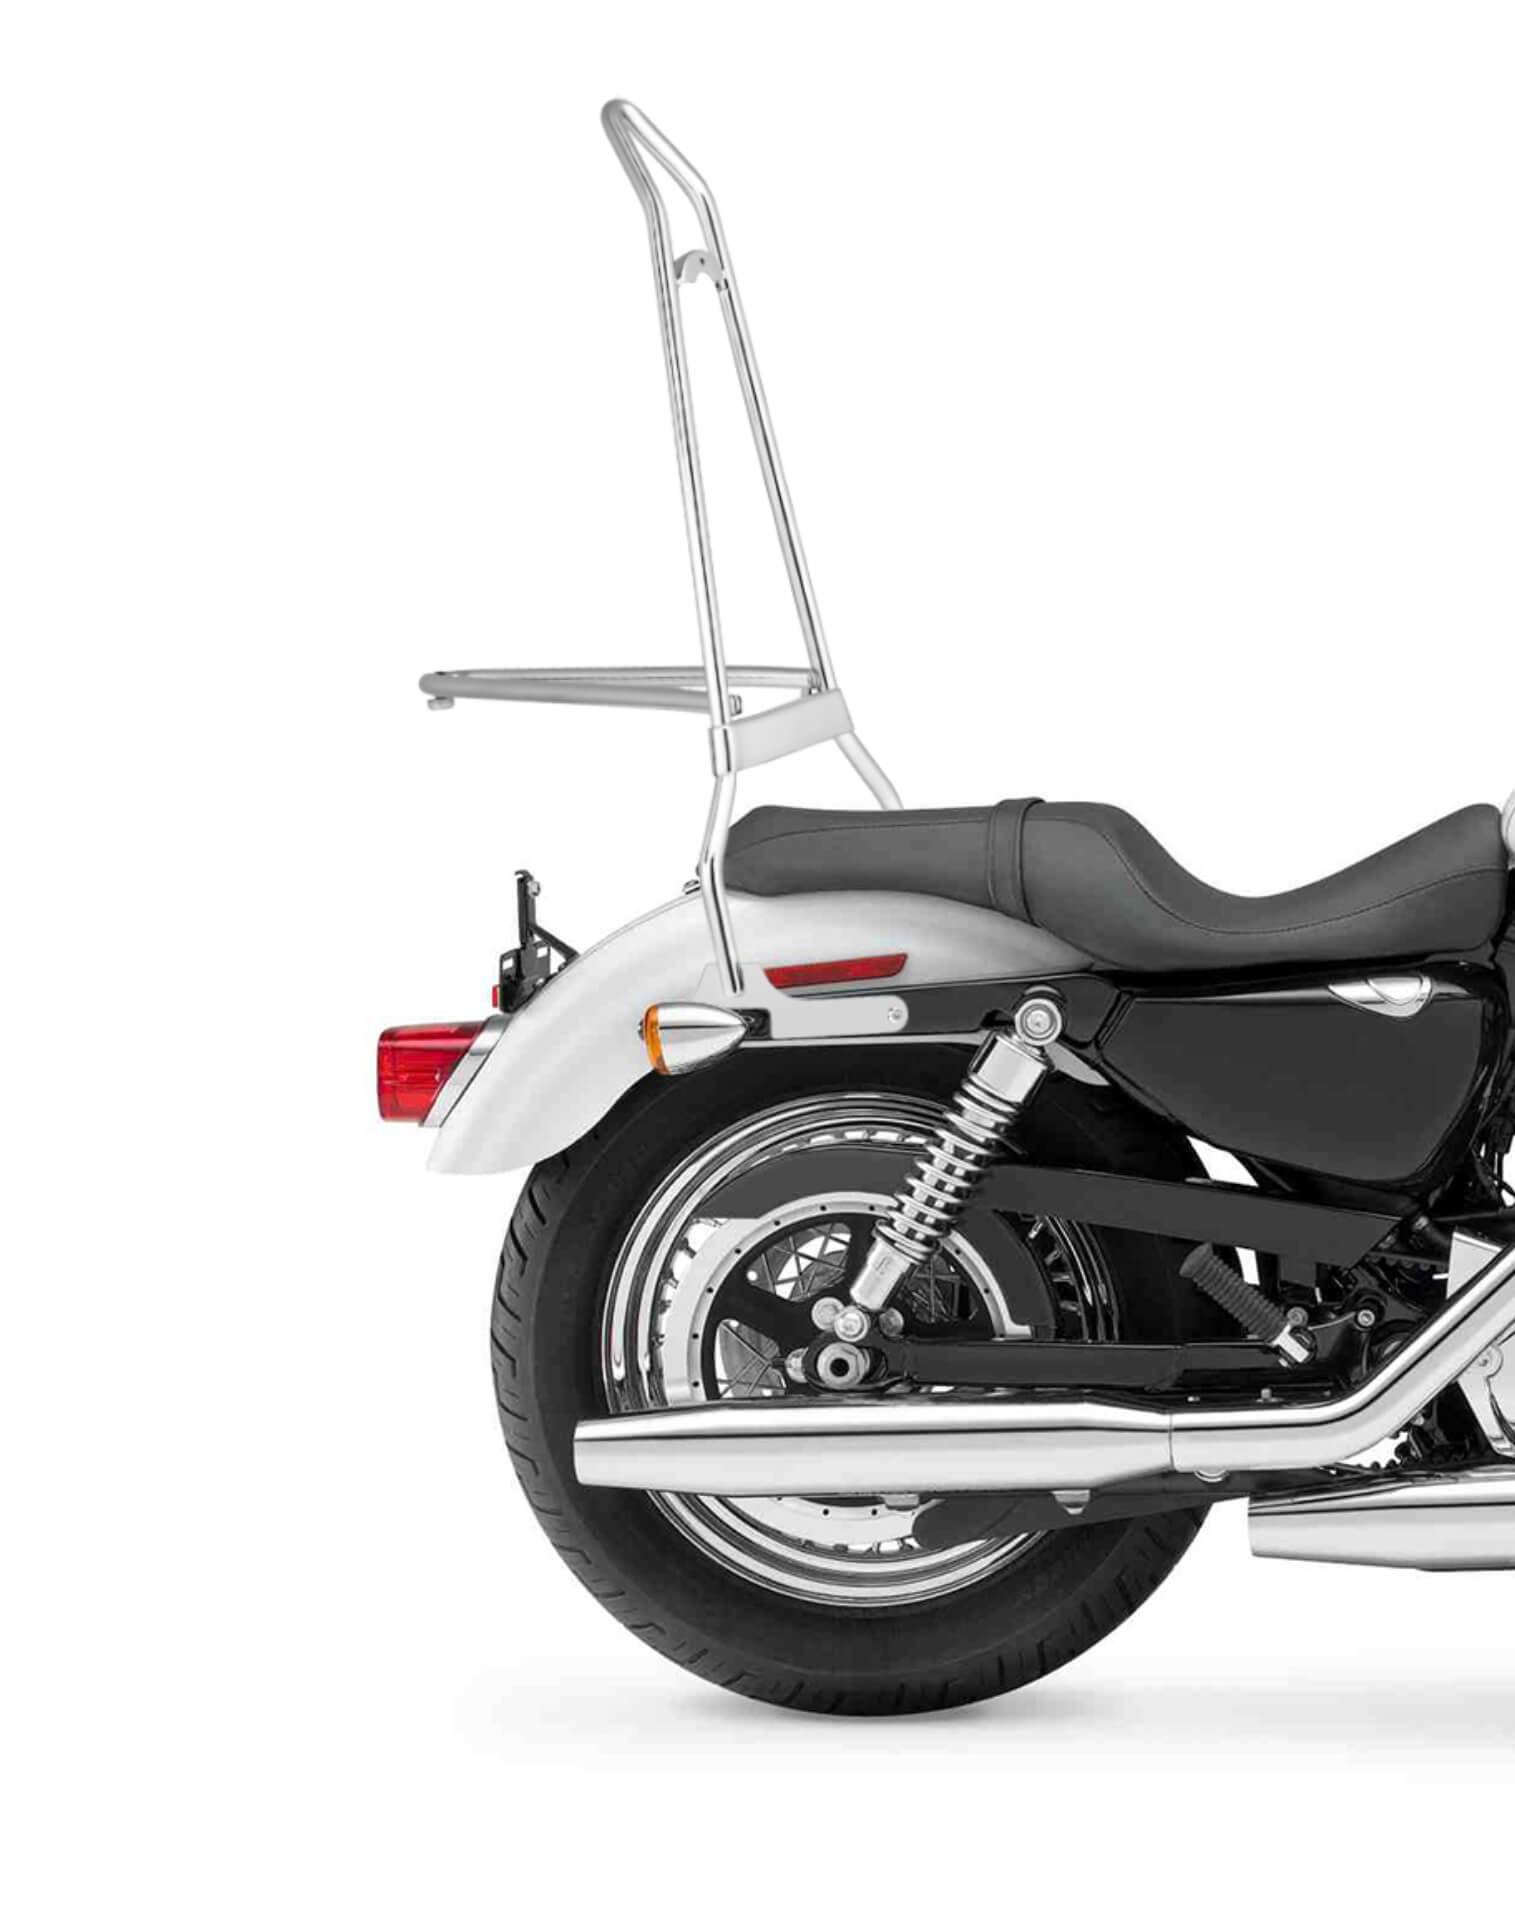 Iron Born Blade 25" Sissy Bar with Foldable Luggage Rack for Harley Sportster 1200 Low XL1200L Chrome Close Up View